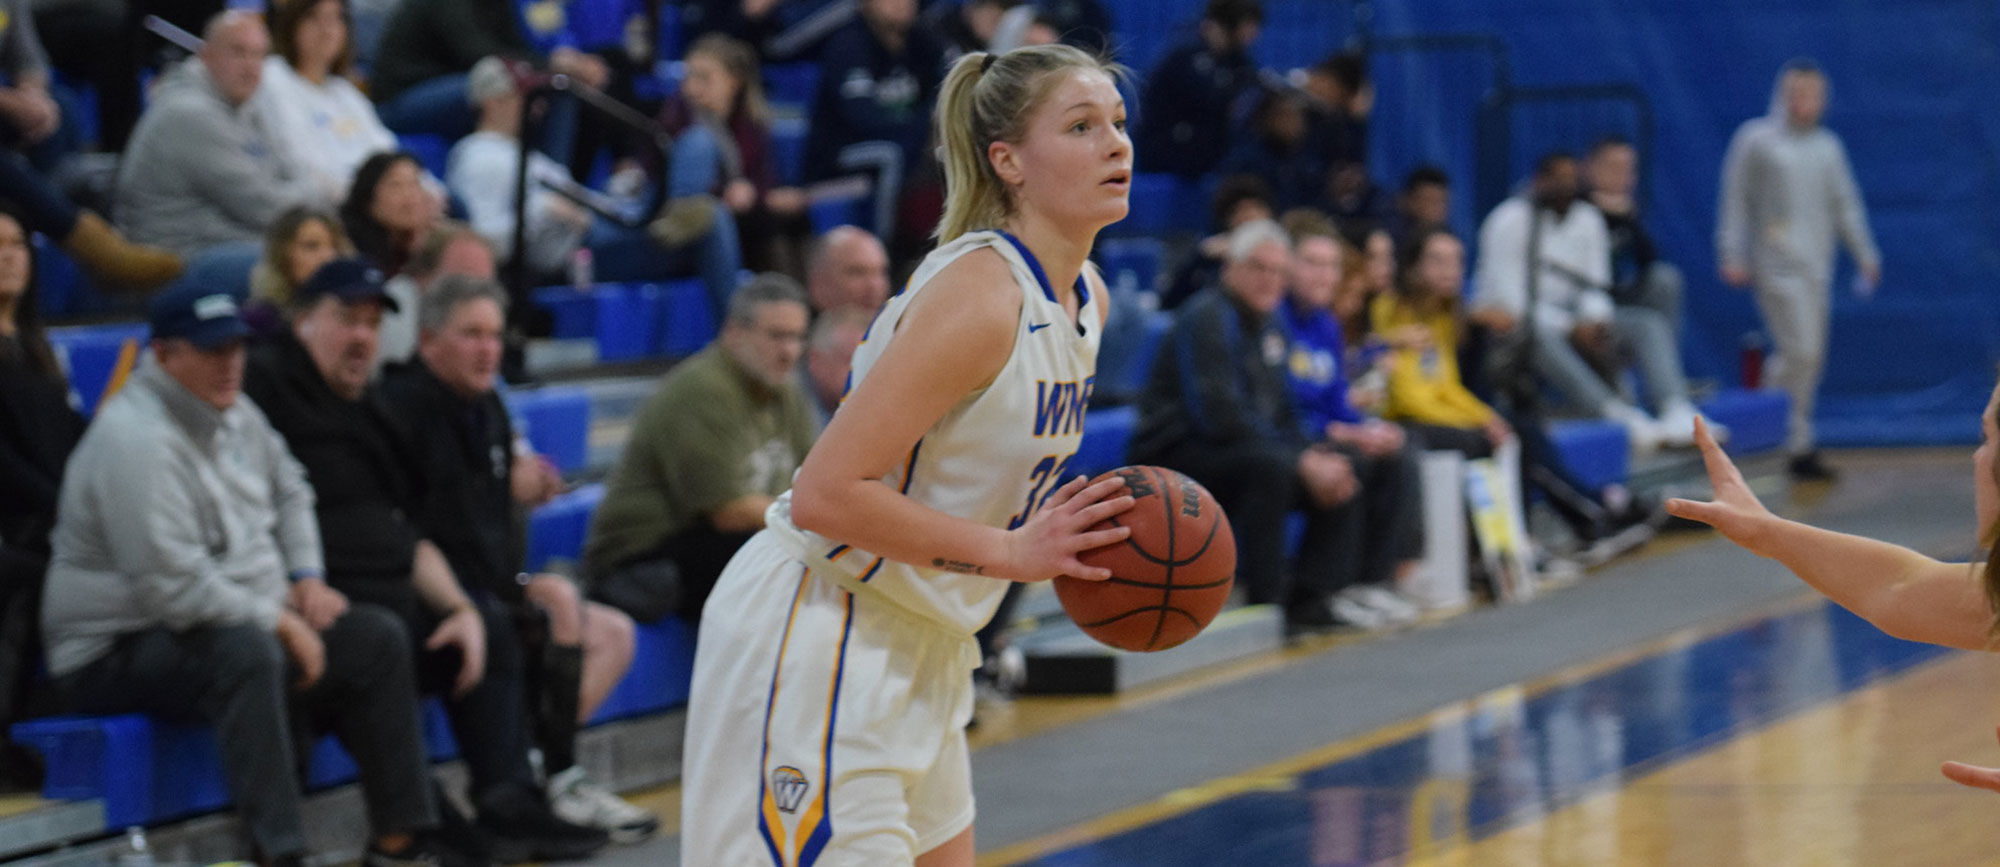 Courtney Carlson scored 23 points in a 61-45 win over Salve Regina on Saturday afternoon. (Photo by Rachael Margossian)